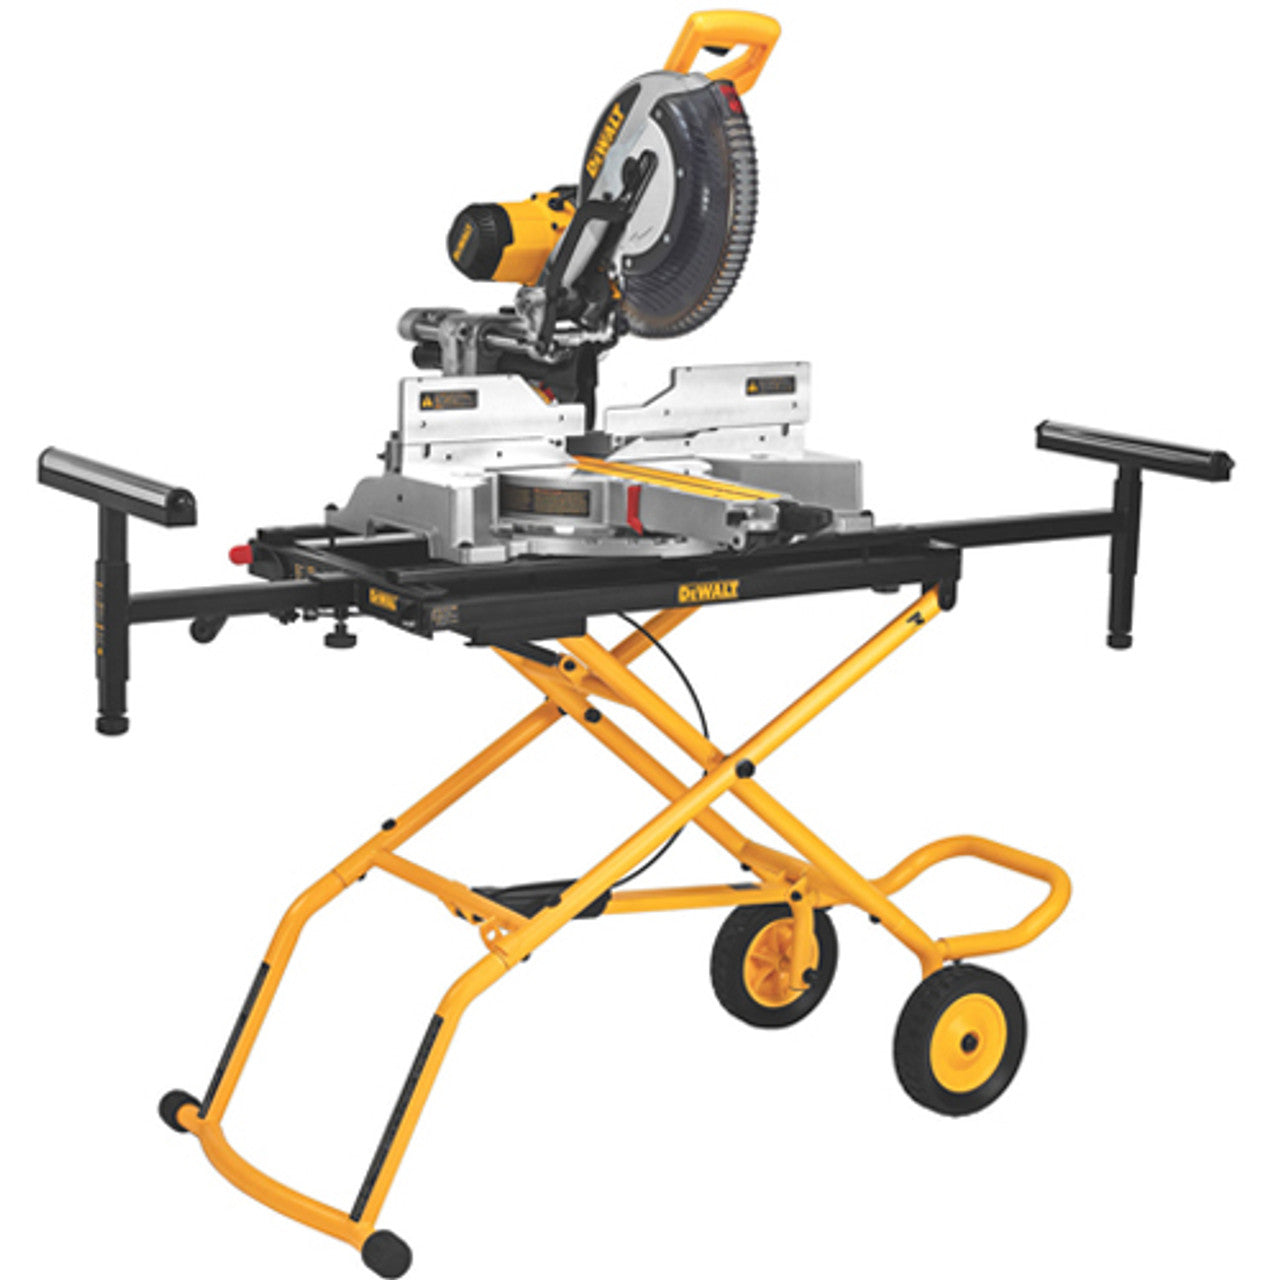 DEWALT DWS780RST  -   12-Inch Double Bevel Sliding Compound Miter Saw - (With Rolling stand)